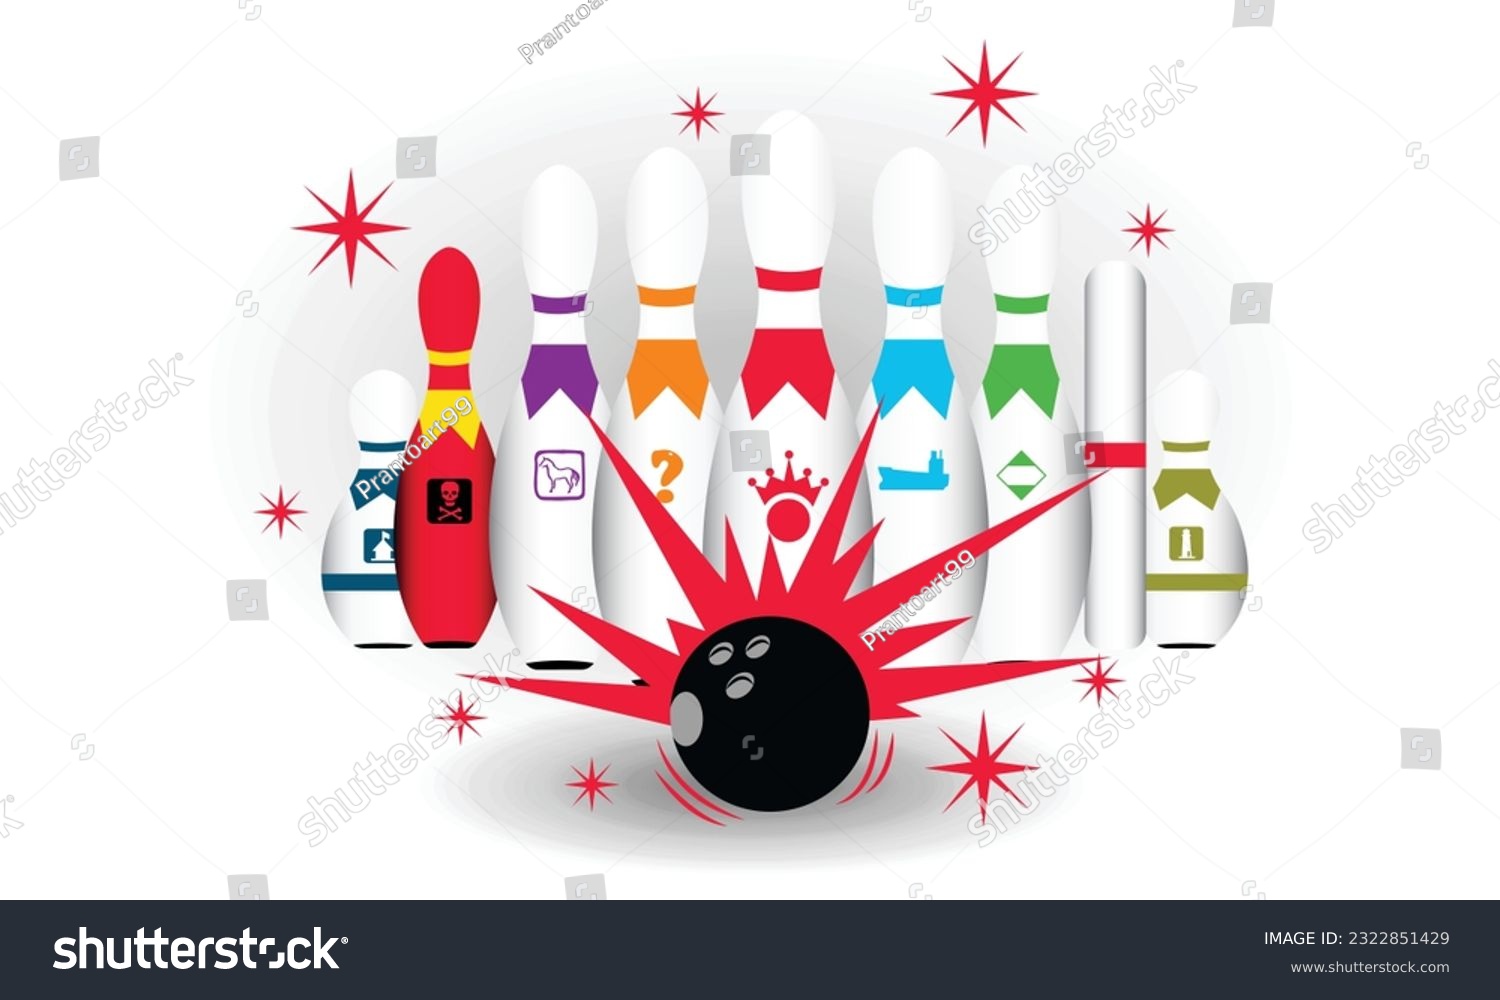 SVG of Bowling Vector Art, Icons, and Graphics SVG Design, Bowling Ball Vector Illustration Design, Bowling Vector Art SVG Illustration Design. svg